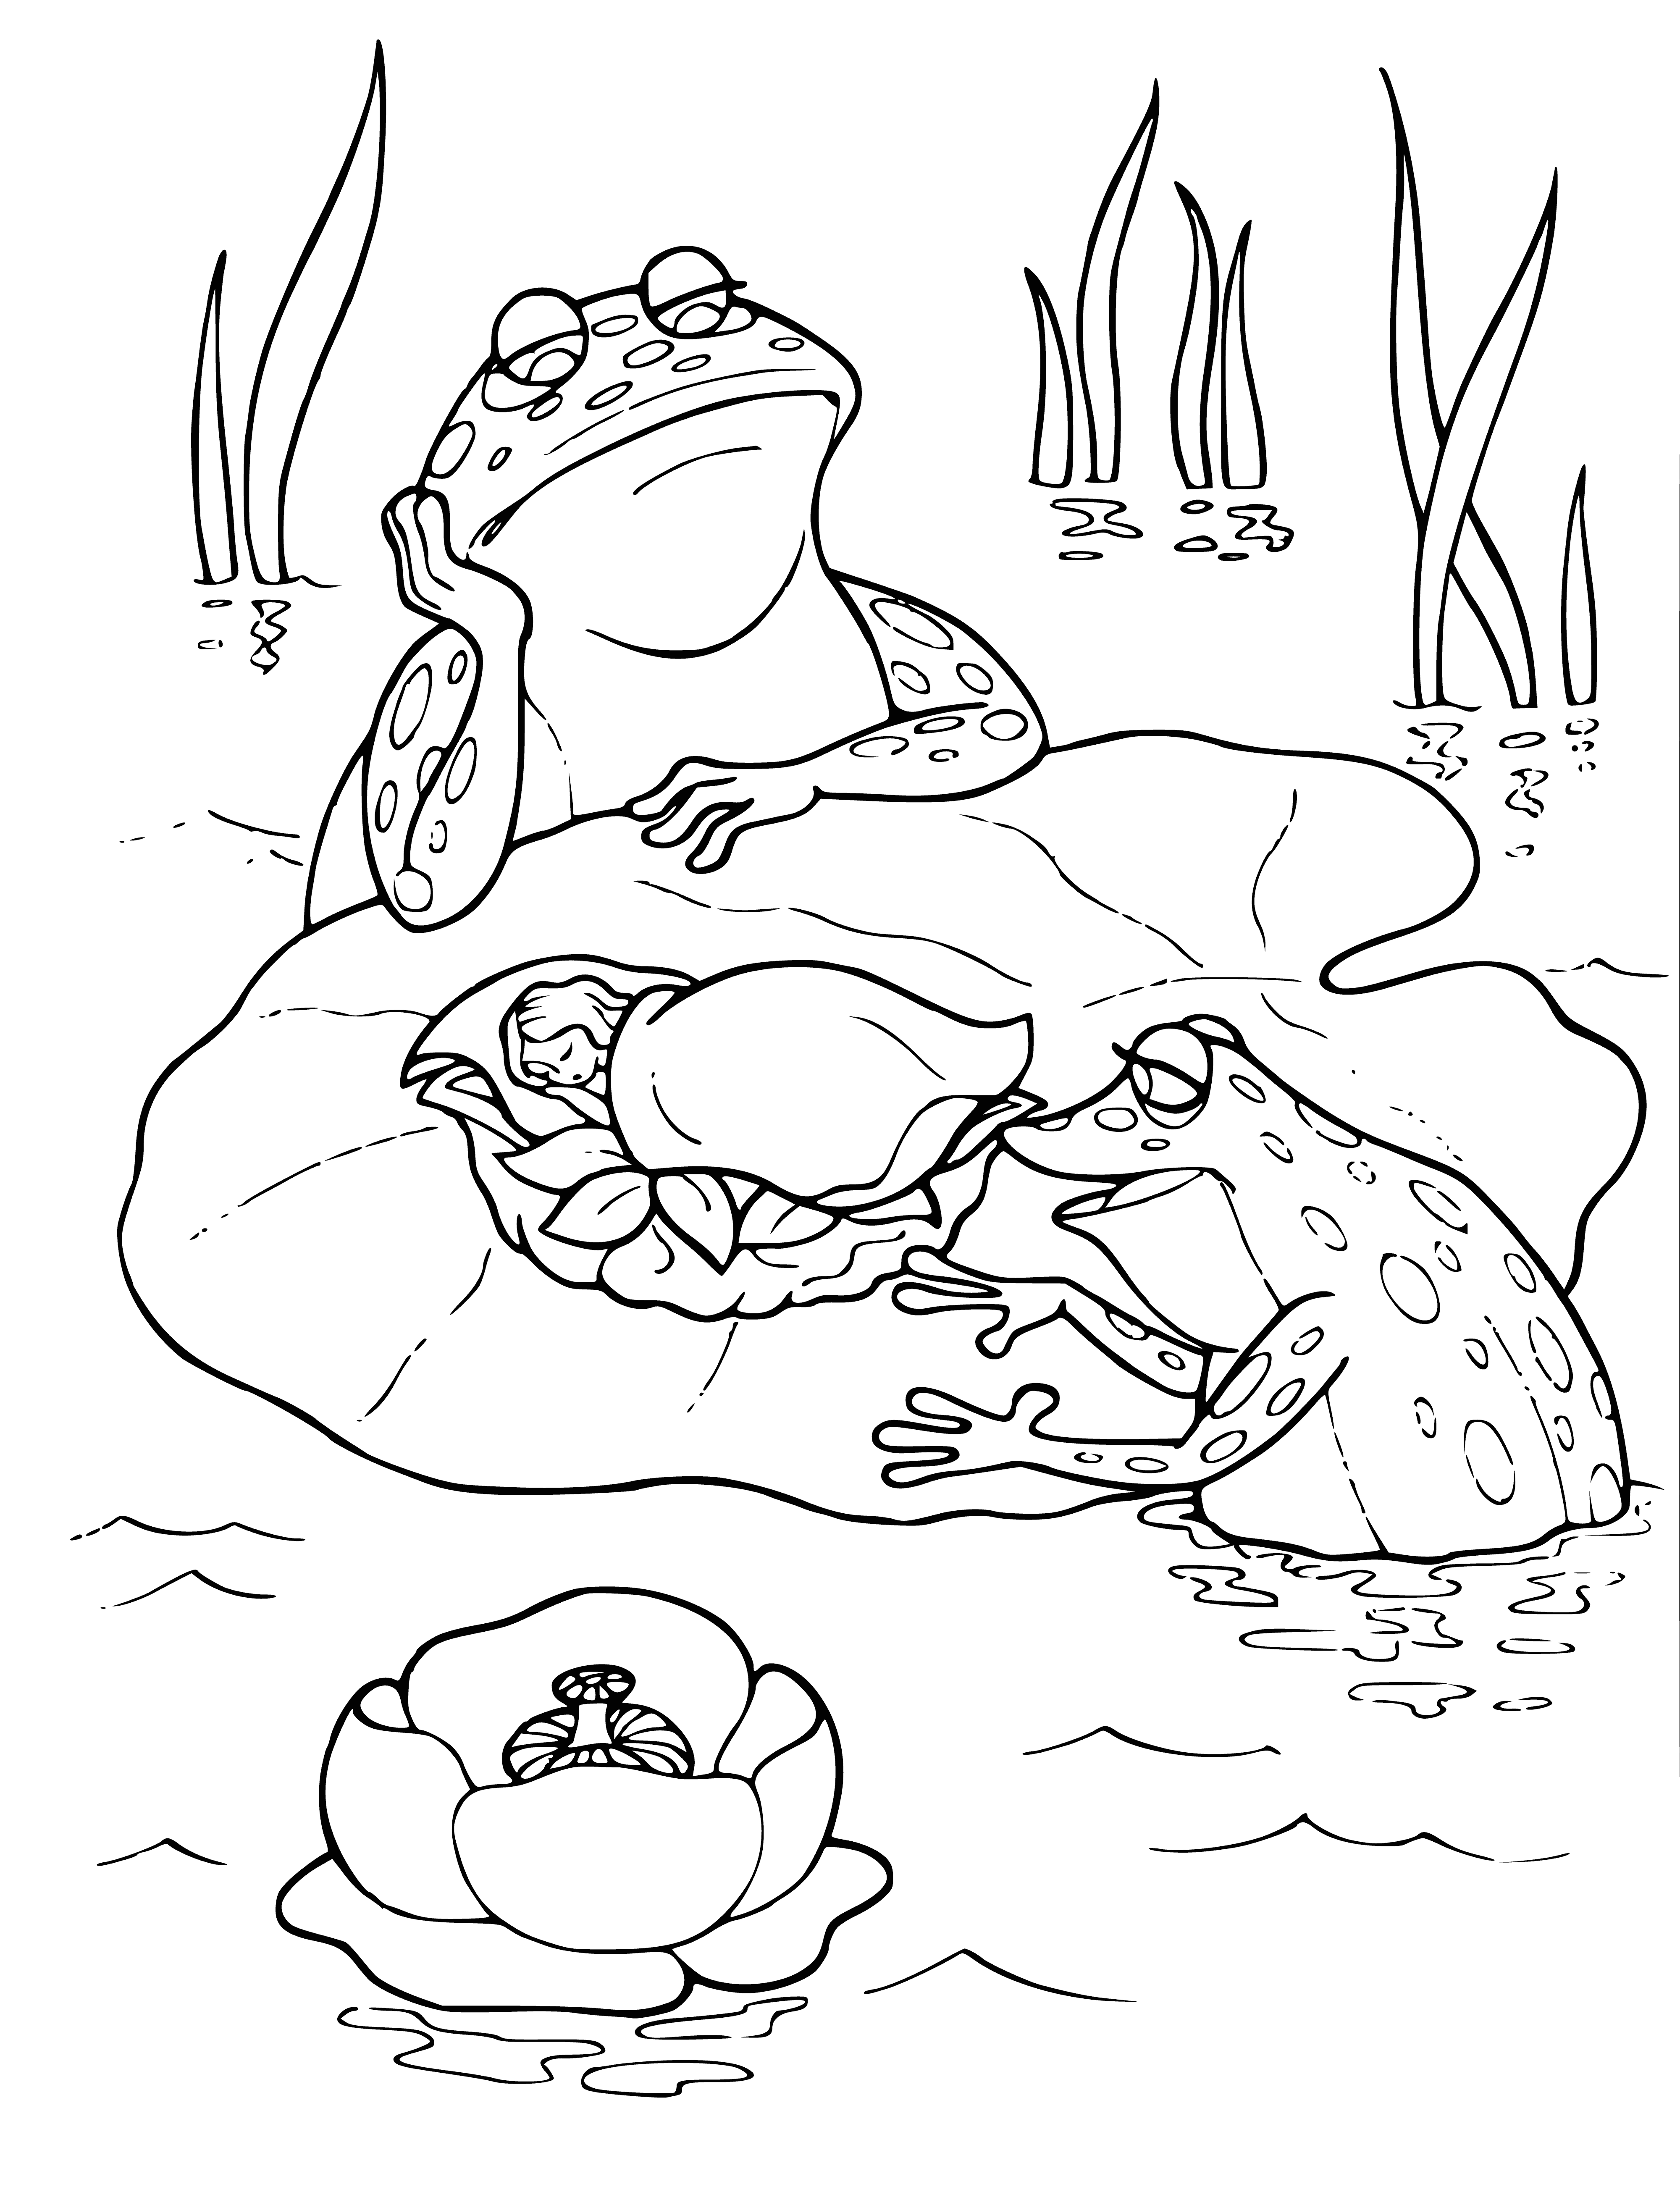 coloring page: Girl meets a toad with a paper tag reading "Thumbelina" around its neck by a cradle lying in the grass.